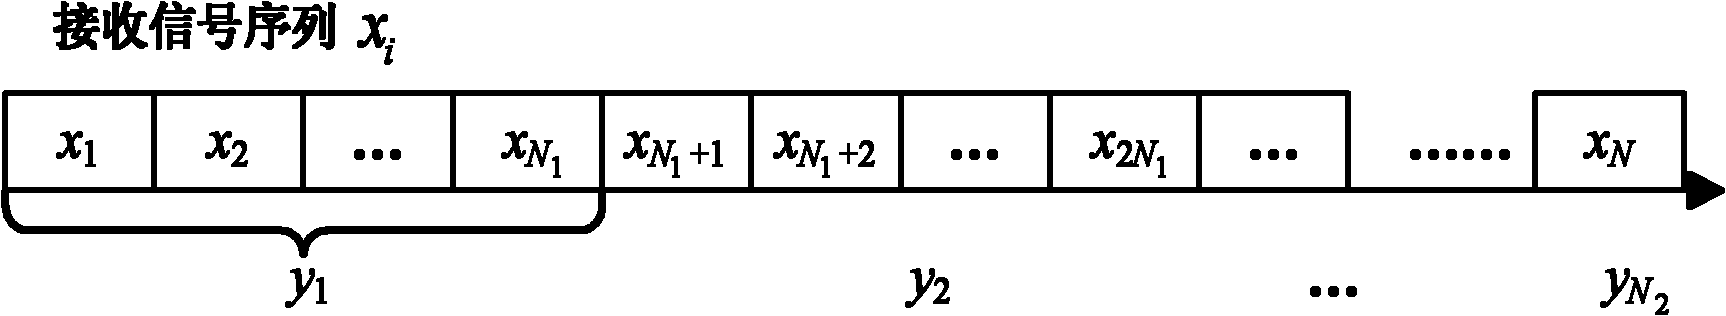 Segmented energy processing-based truncated sequential test method